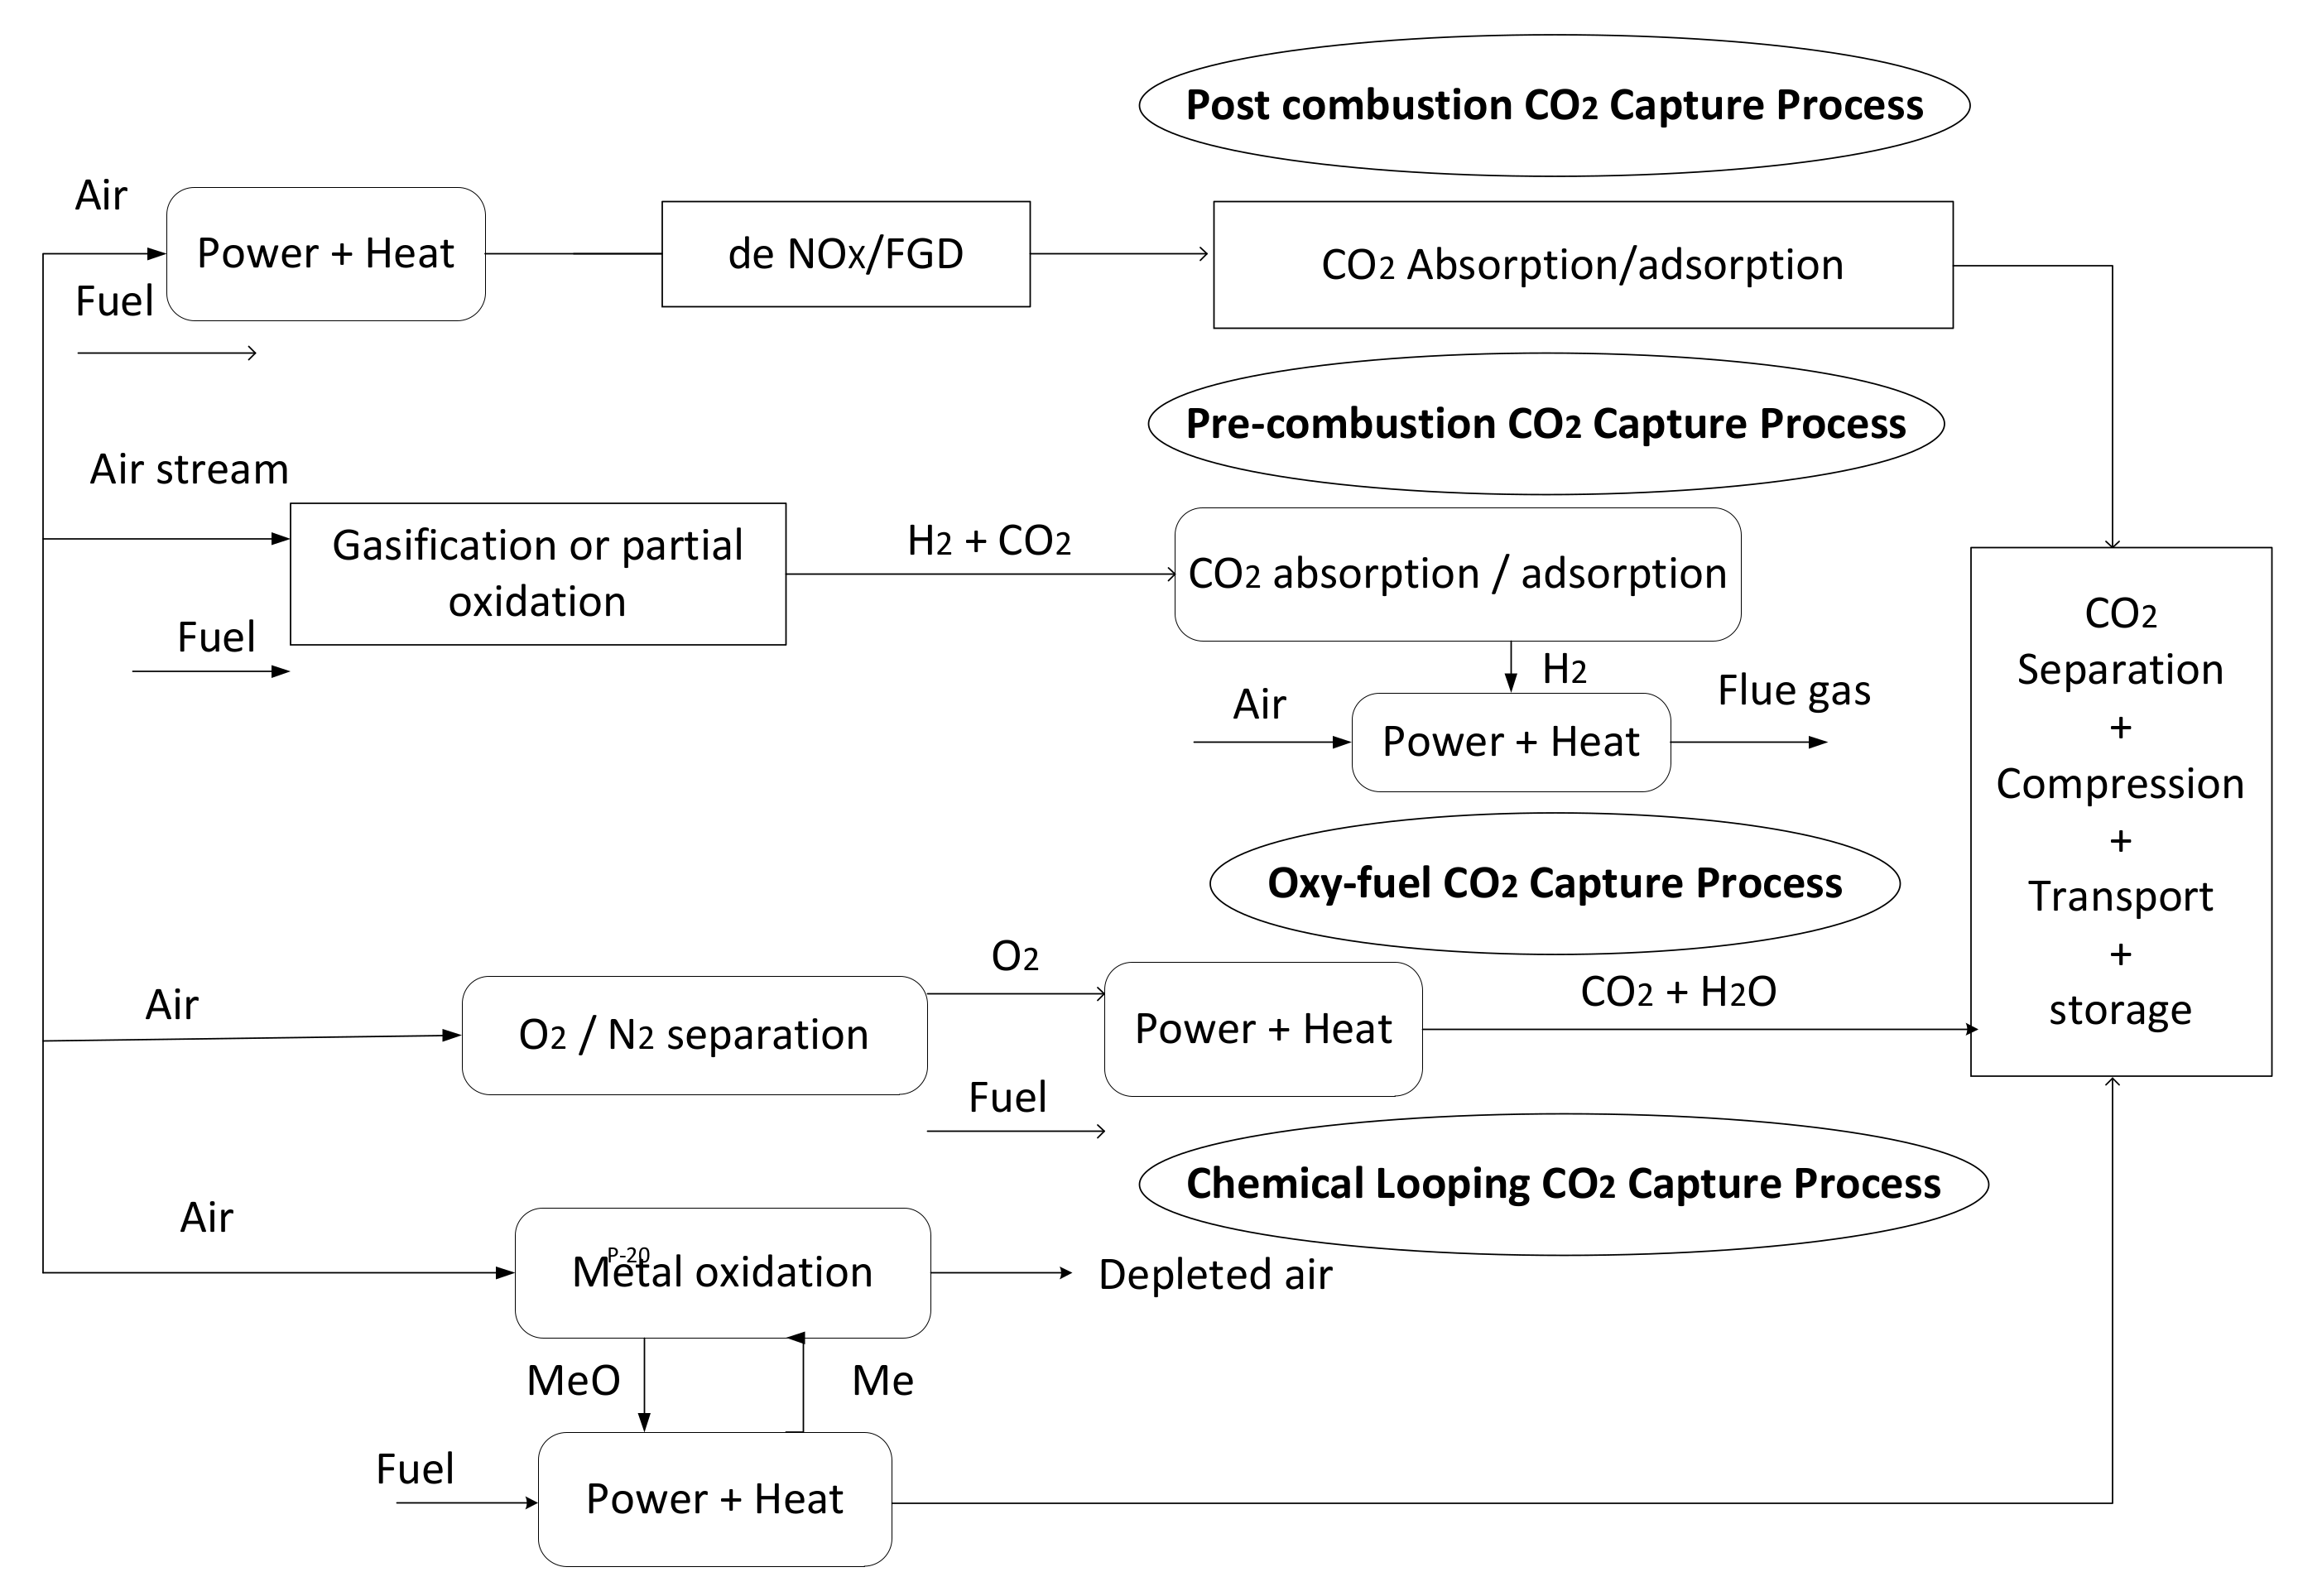 Mechanisms of Heat Loss or Transfer  EGEE 102: Energy Conservation and  Environmental Protection